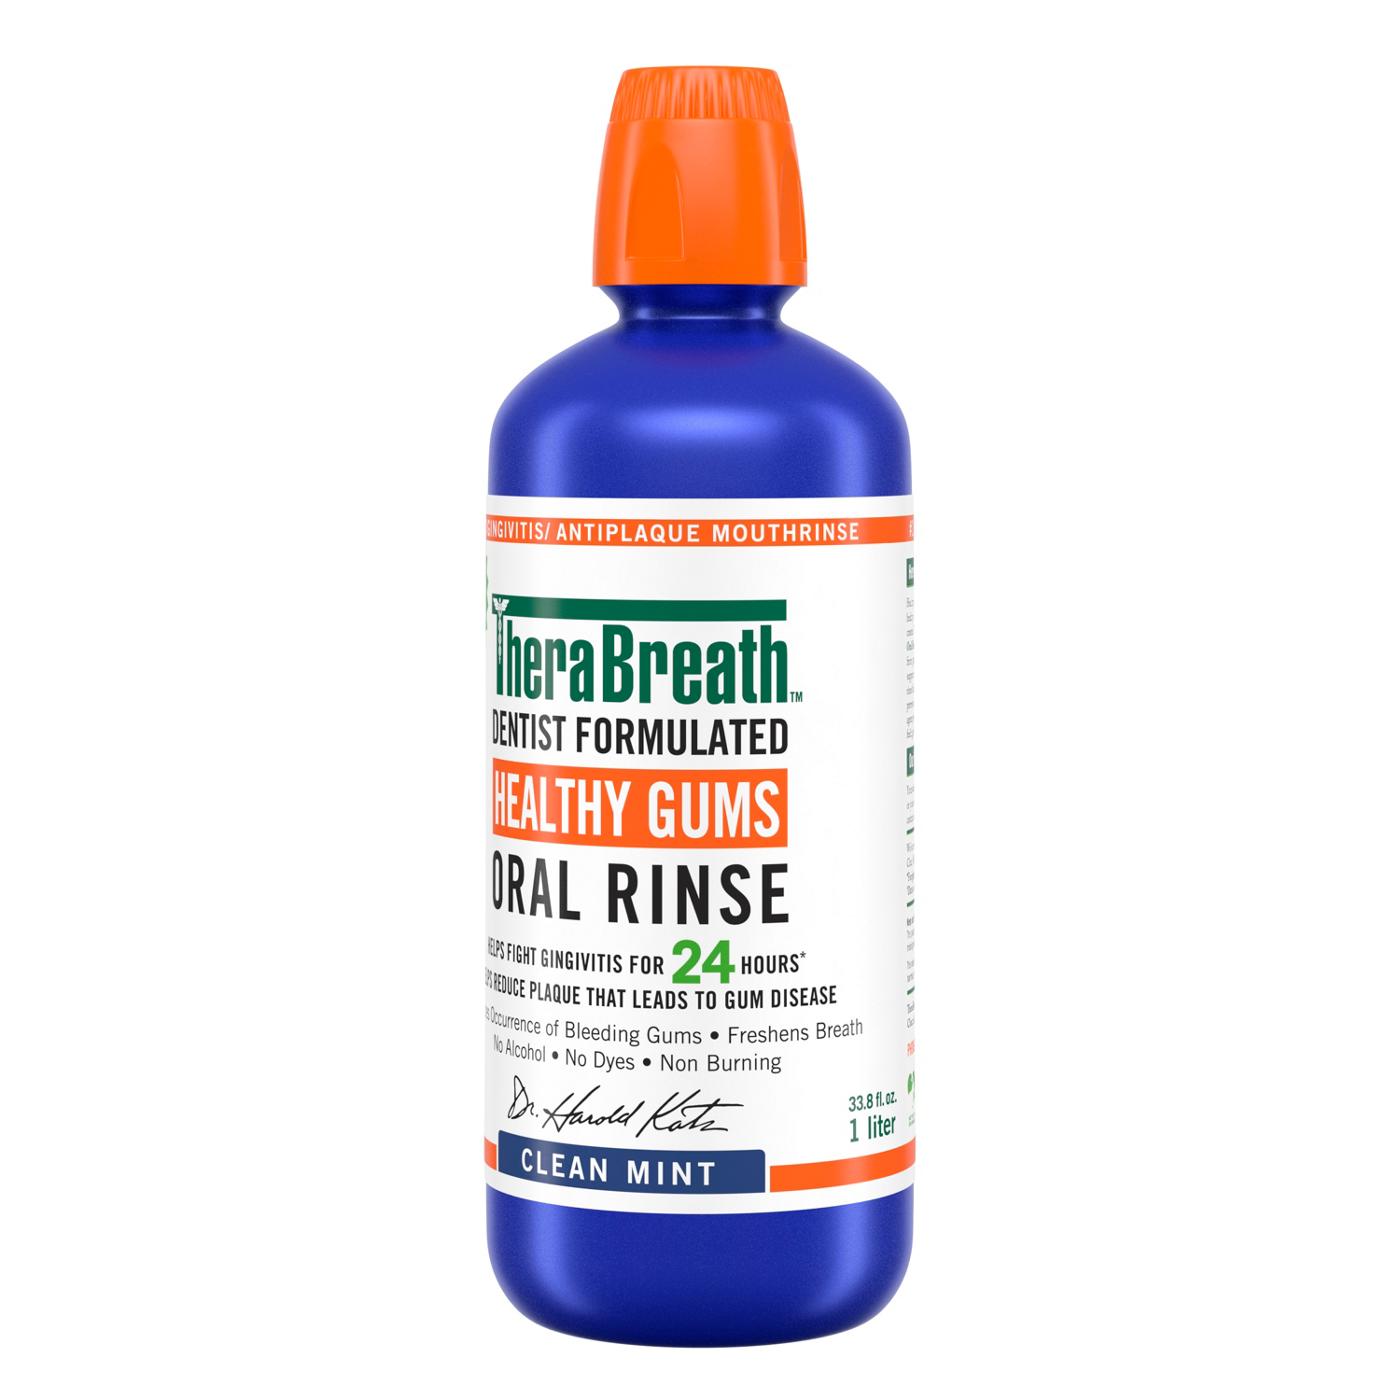 TheraBreath Healthy Gums Oral Rinse - Clean Mint; image 5 of 6